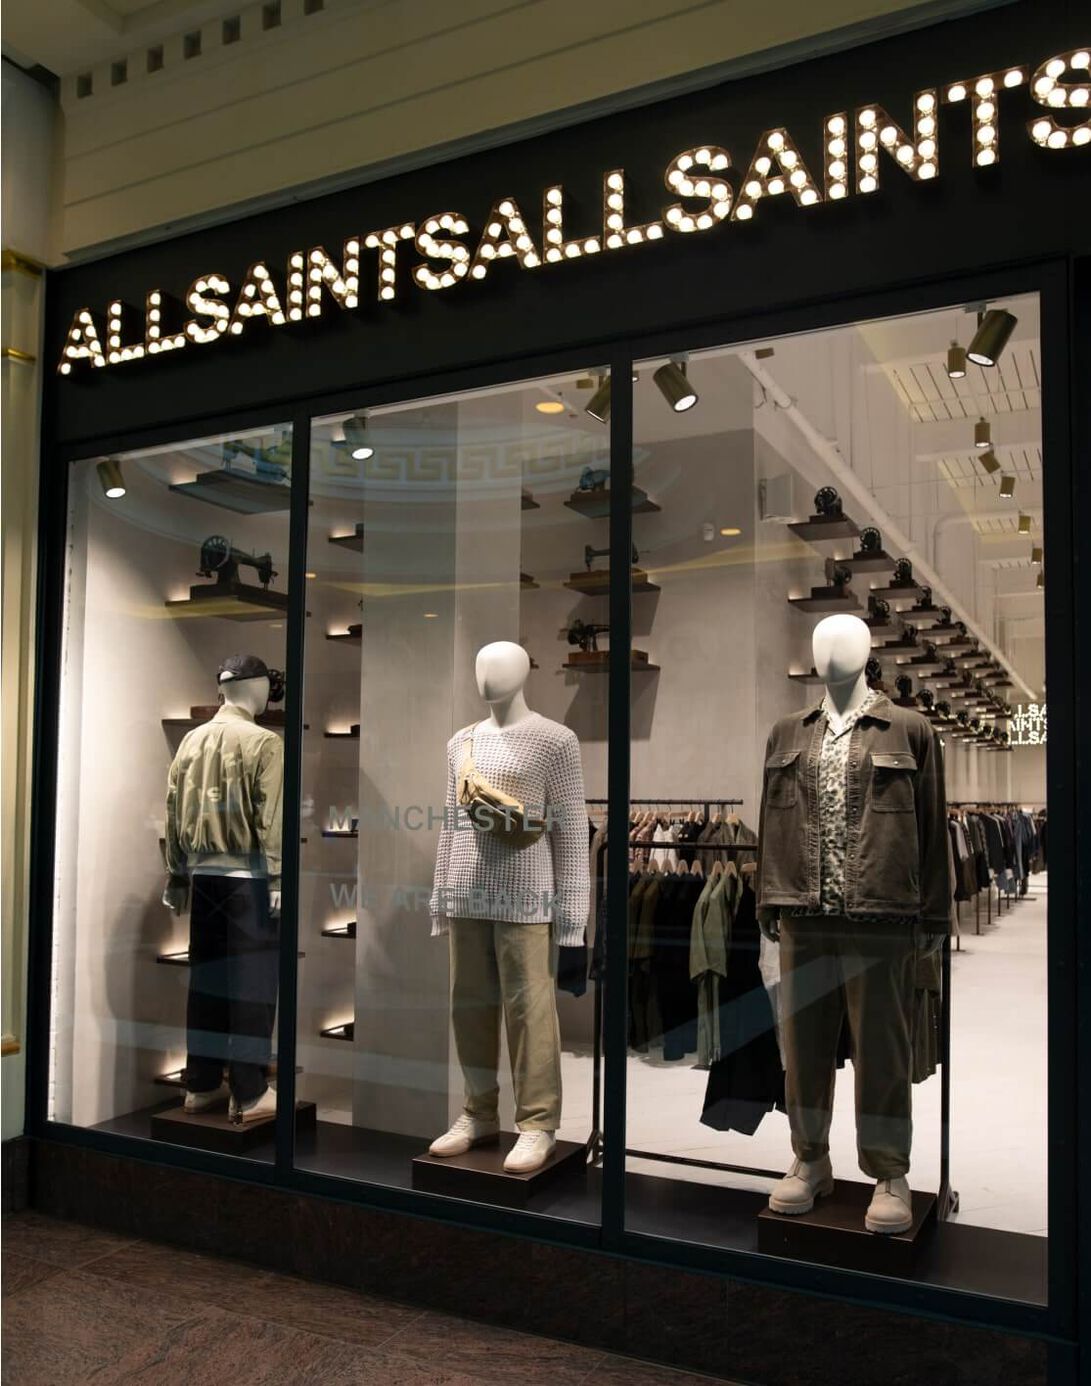 Photograph showing the main display window to our Trafford store in manchester, with mannequins and ALLSAINTS written in light bulbs.